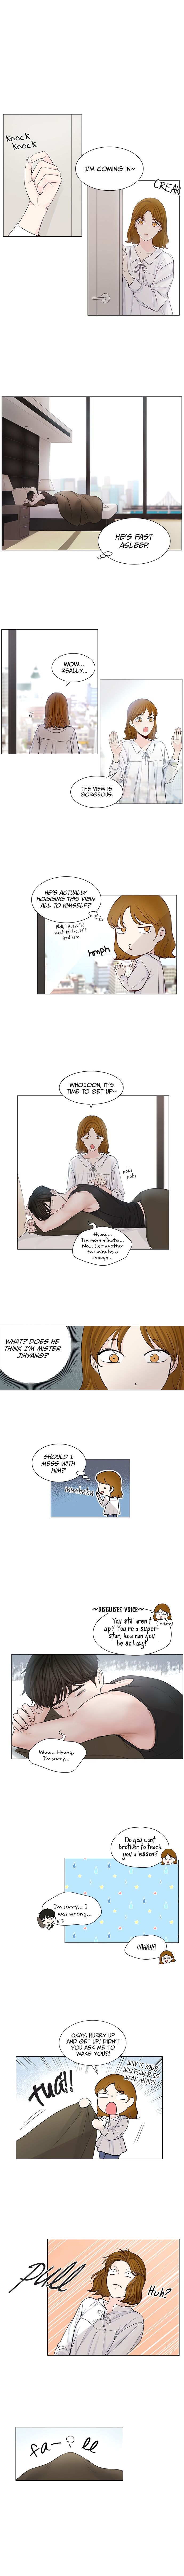 So I Married An Anti-Fan Chapter 043 page 7